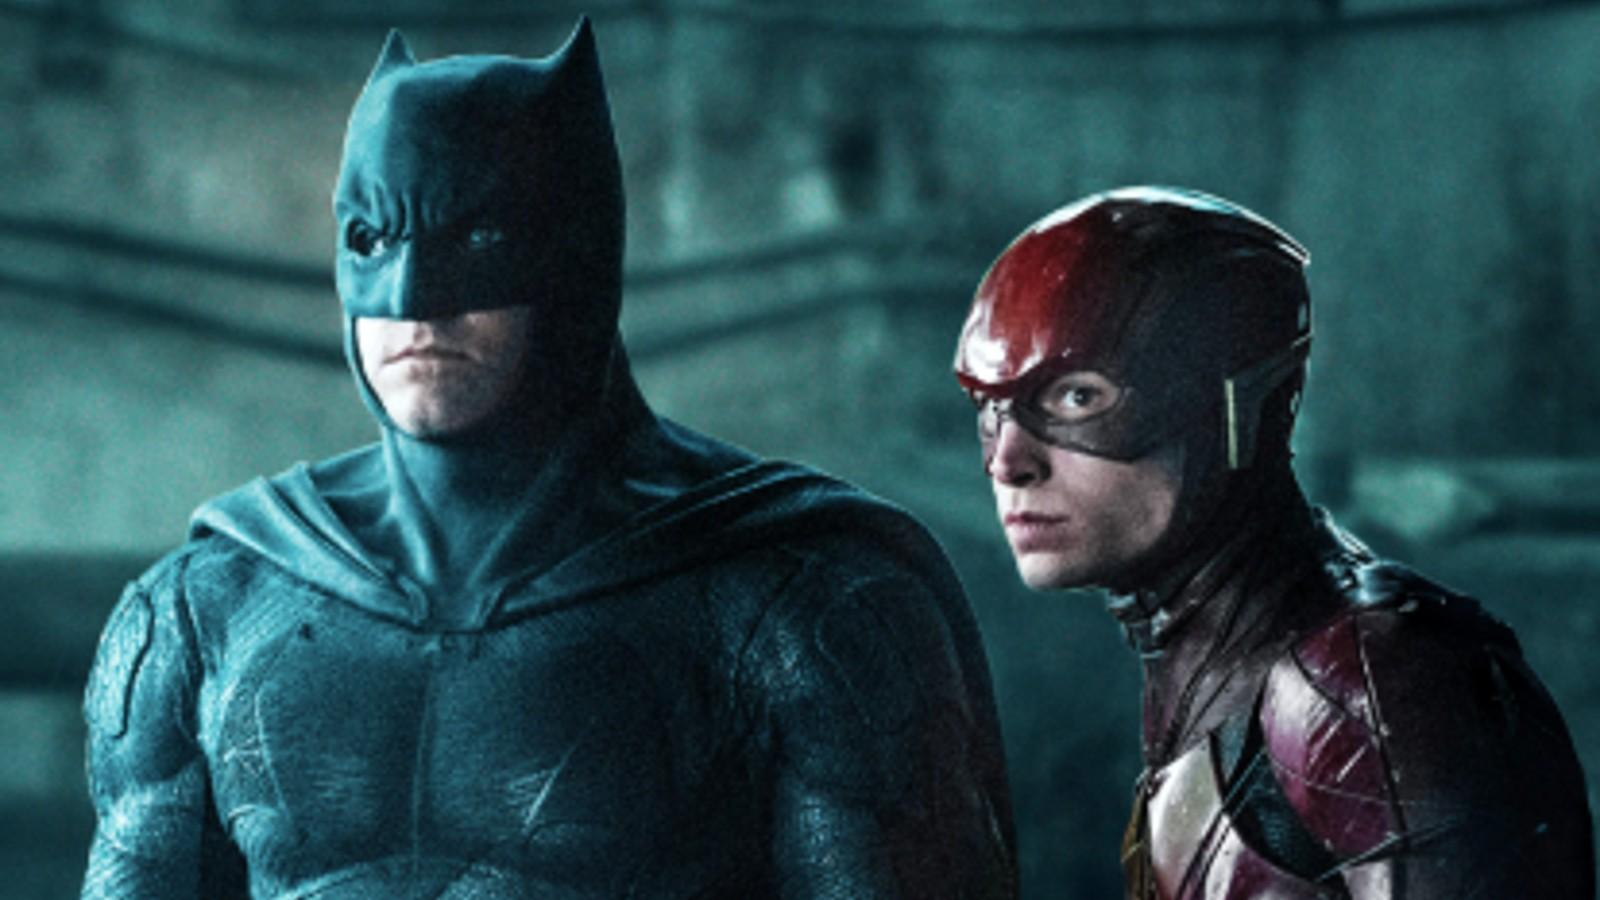 Batman stands next to The Flash in Justice League